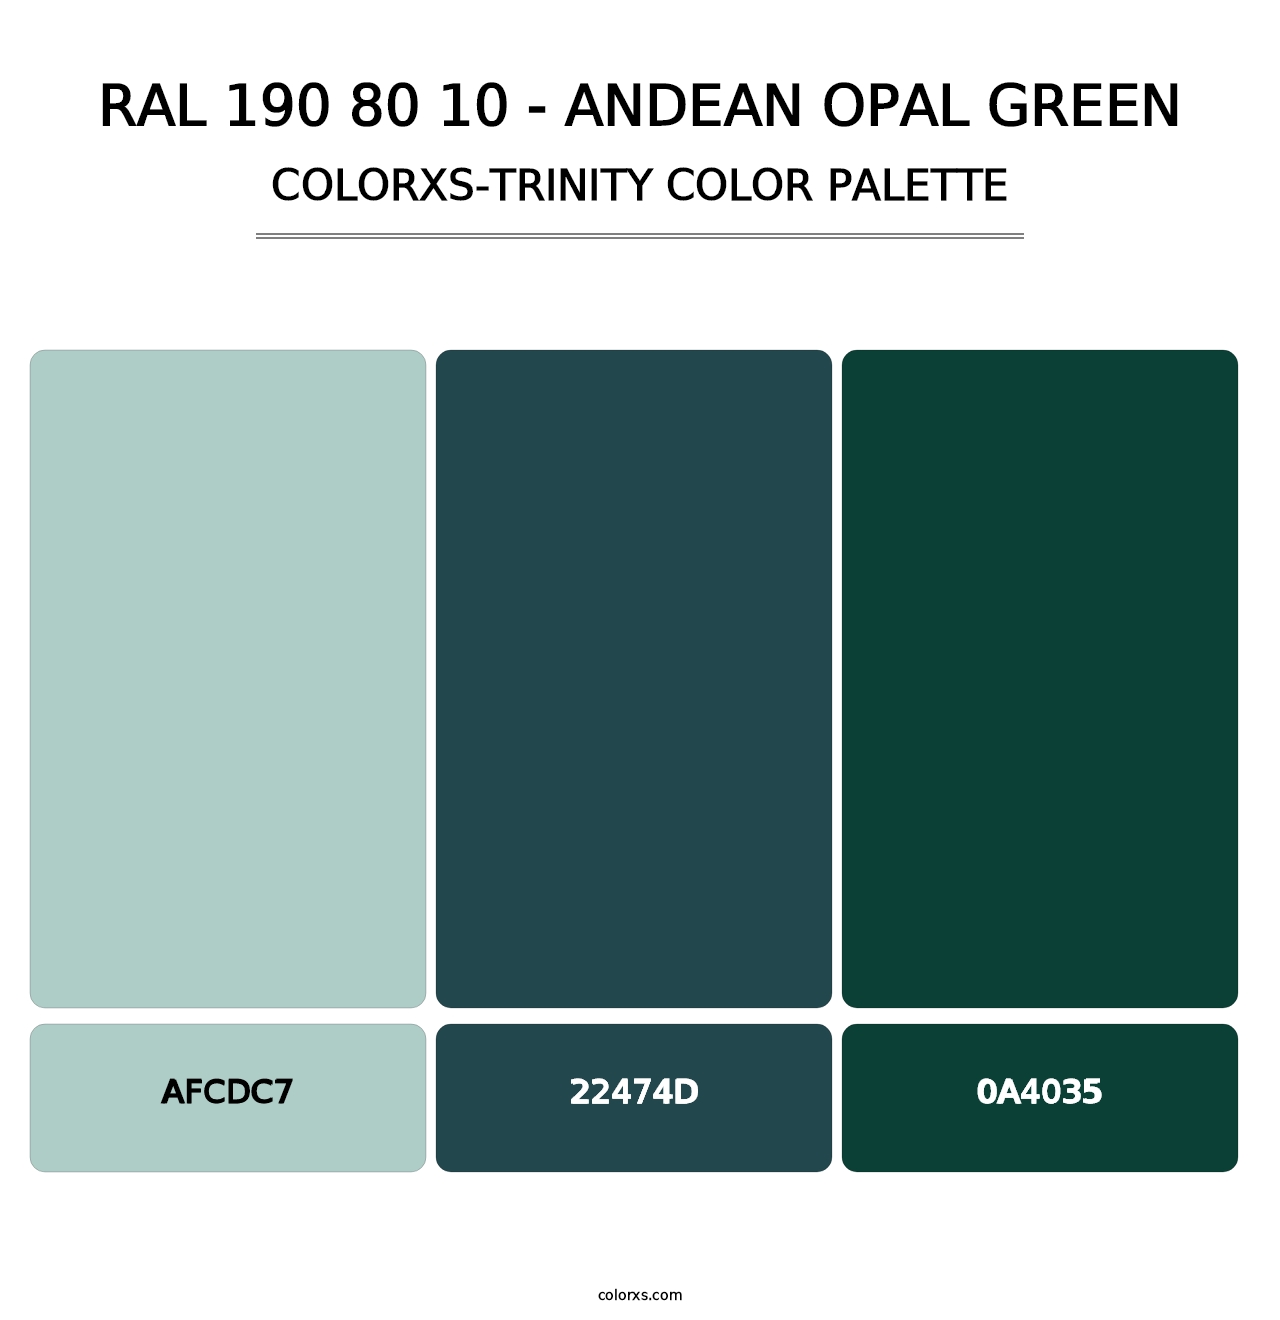 RAL 190 80 10 - Andean Opal Green - Colorxs Trinity Palette